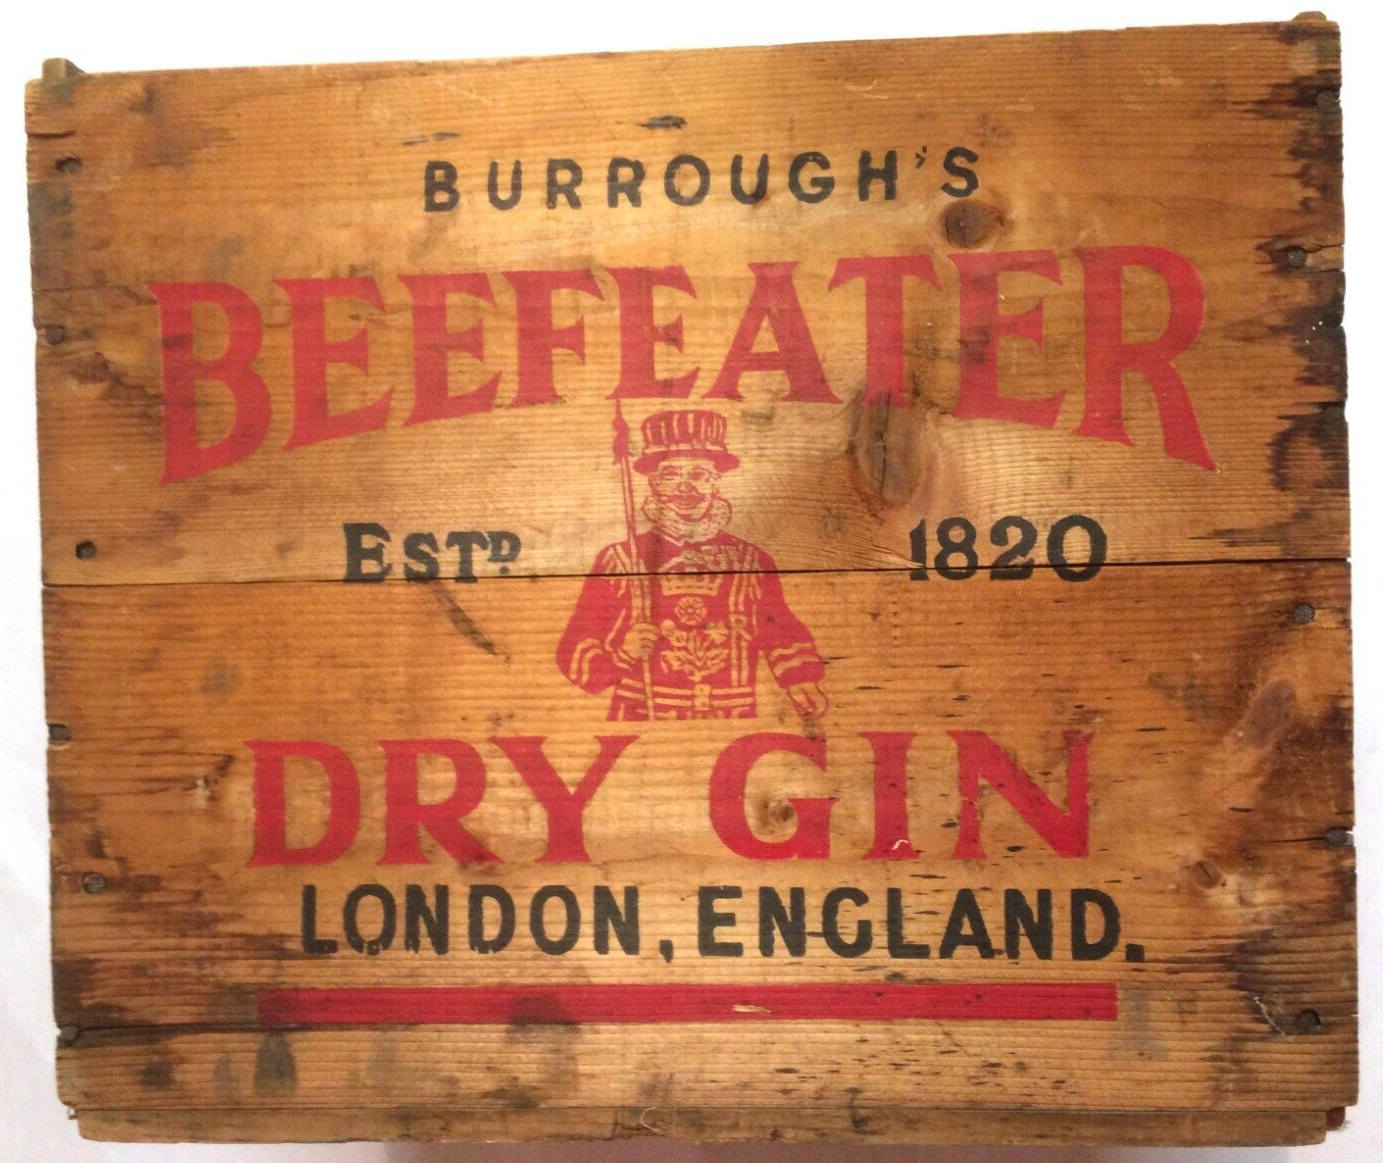 Burrough’s Beefeater Dry Gin Vintage Wood Box Crate - St Louis Via New Orleans